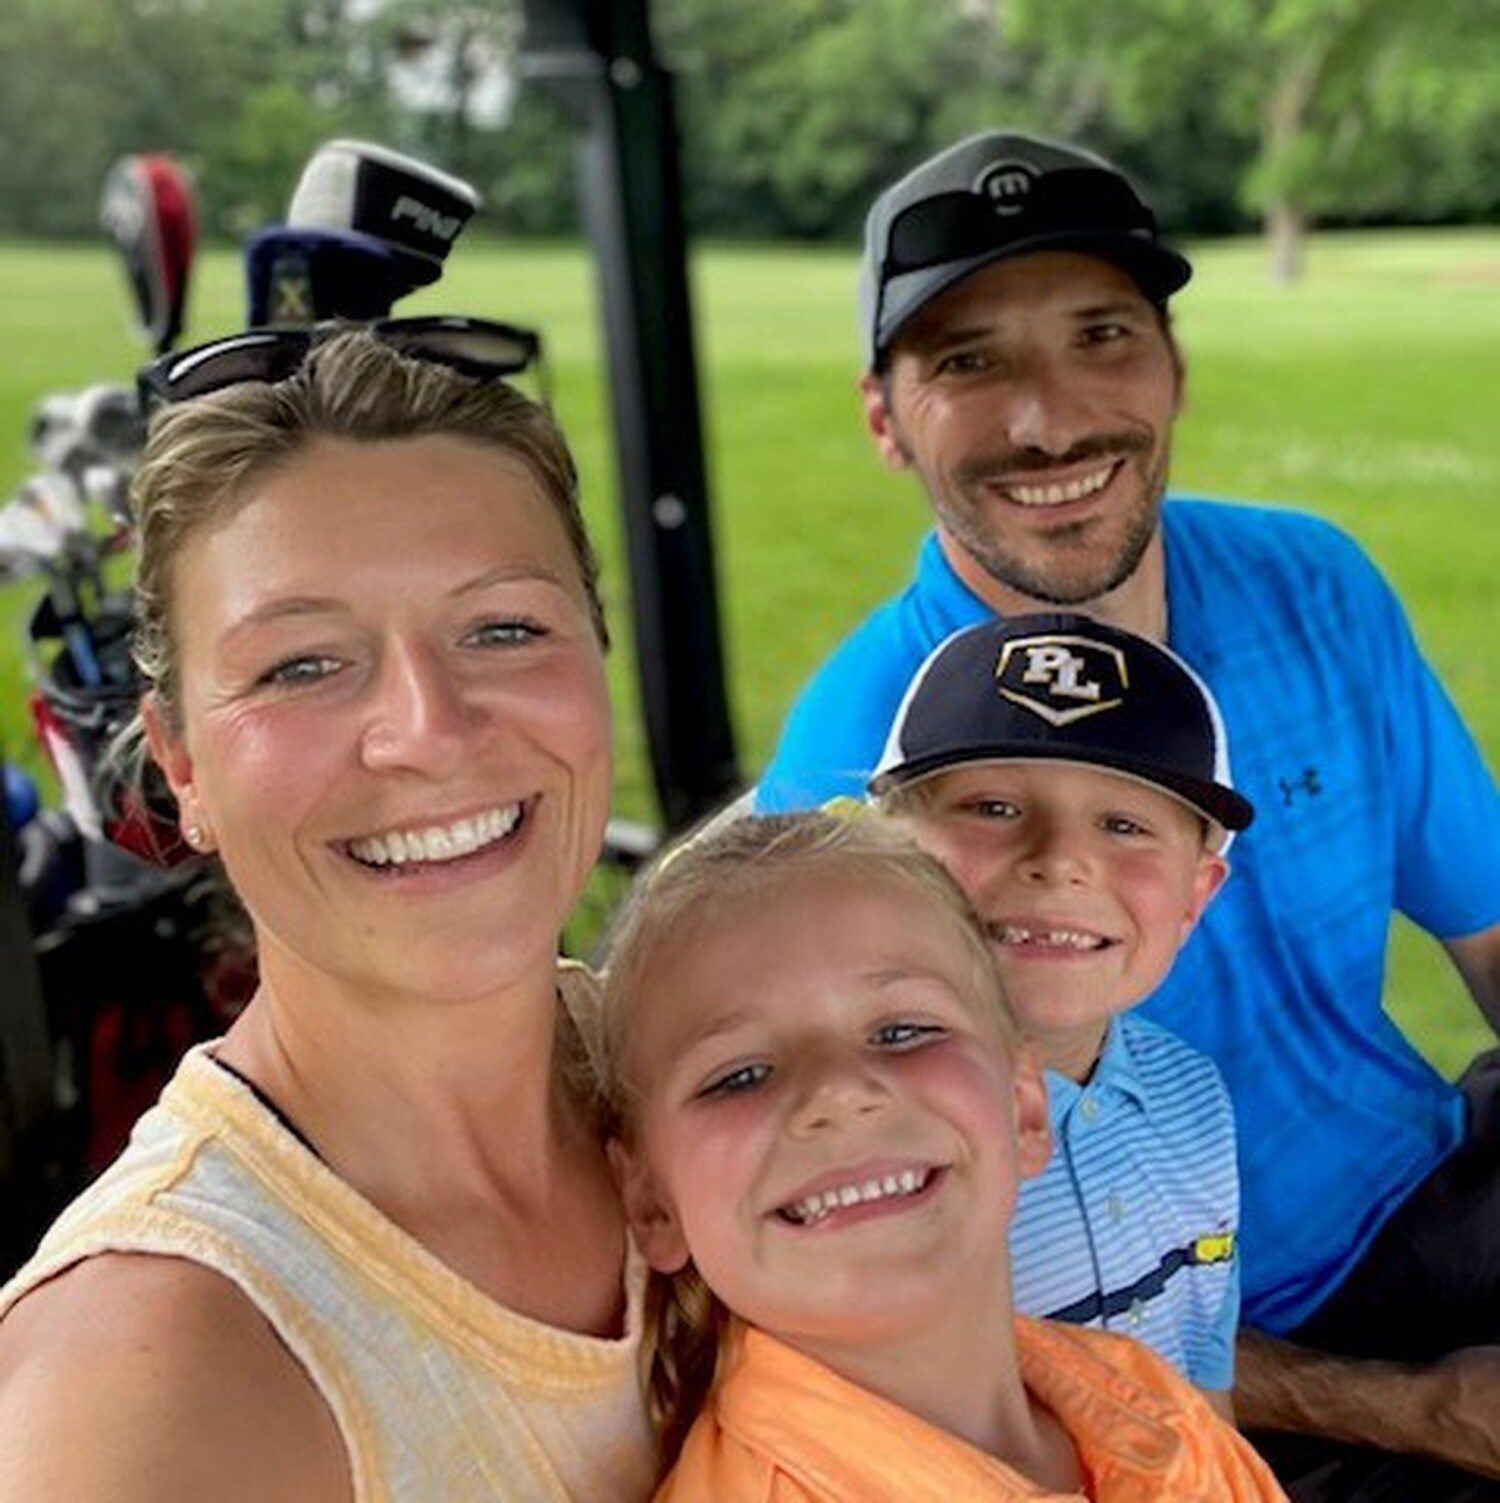 Amy Crnecki smiles while sitting in a golf cart with her family